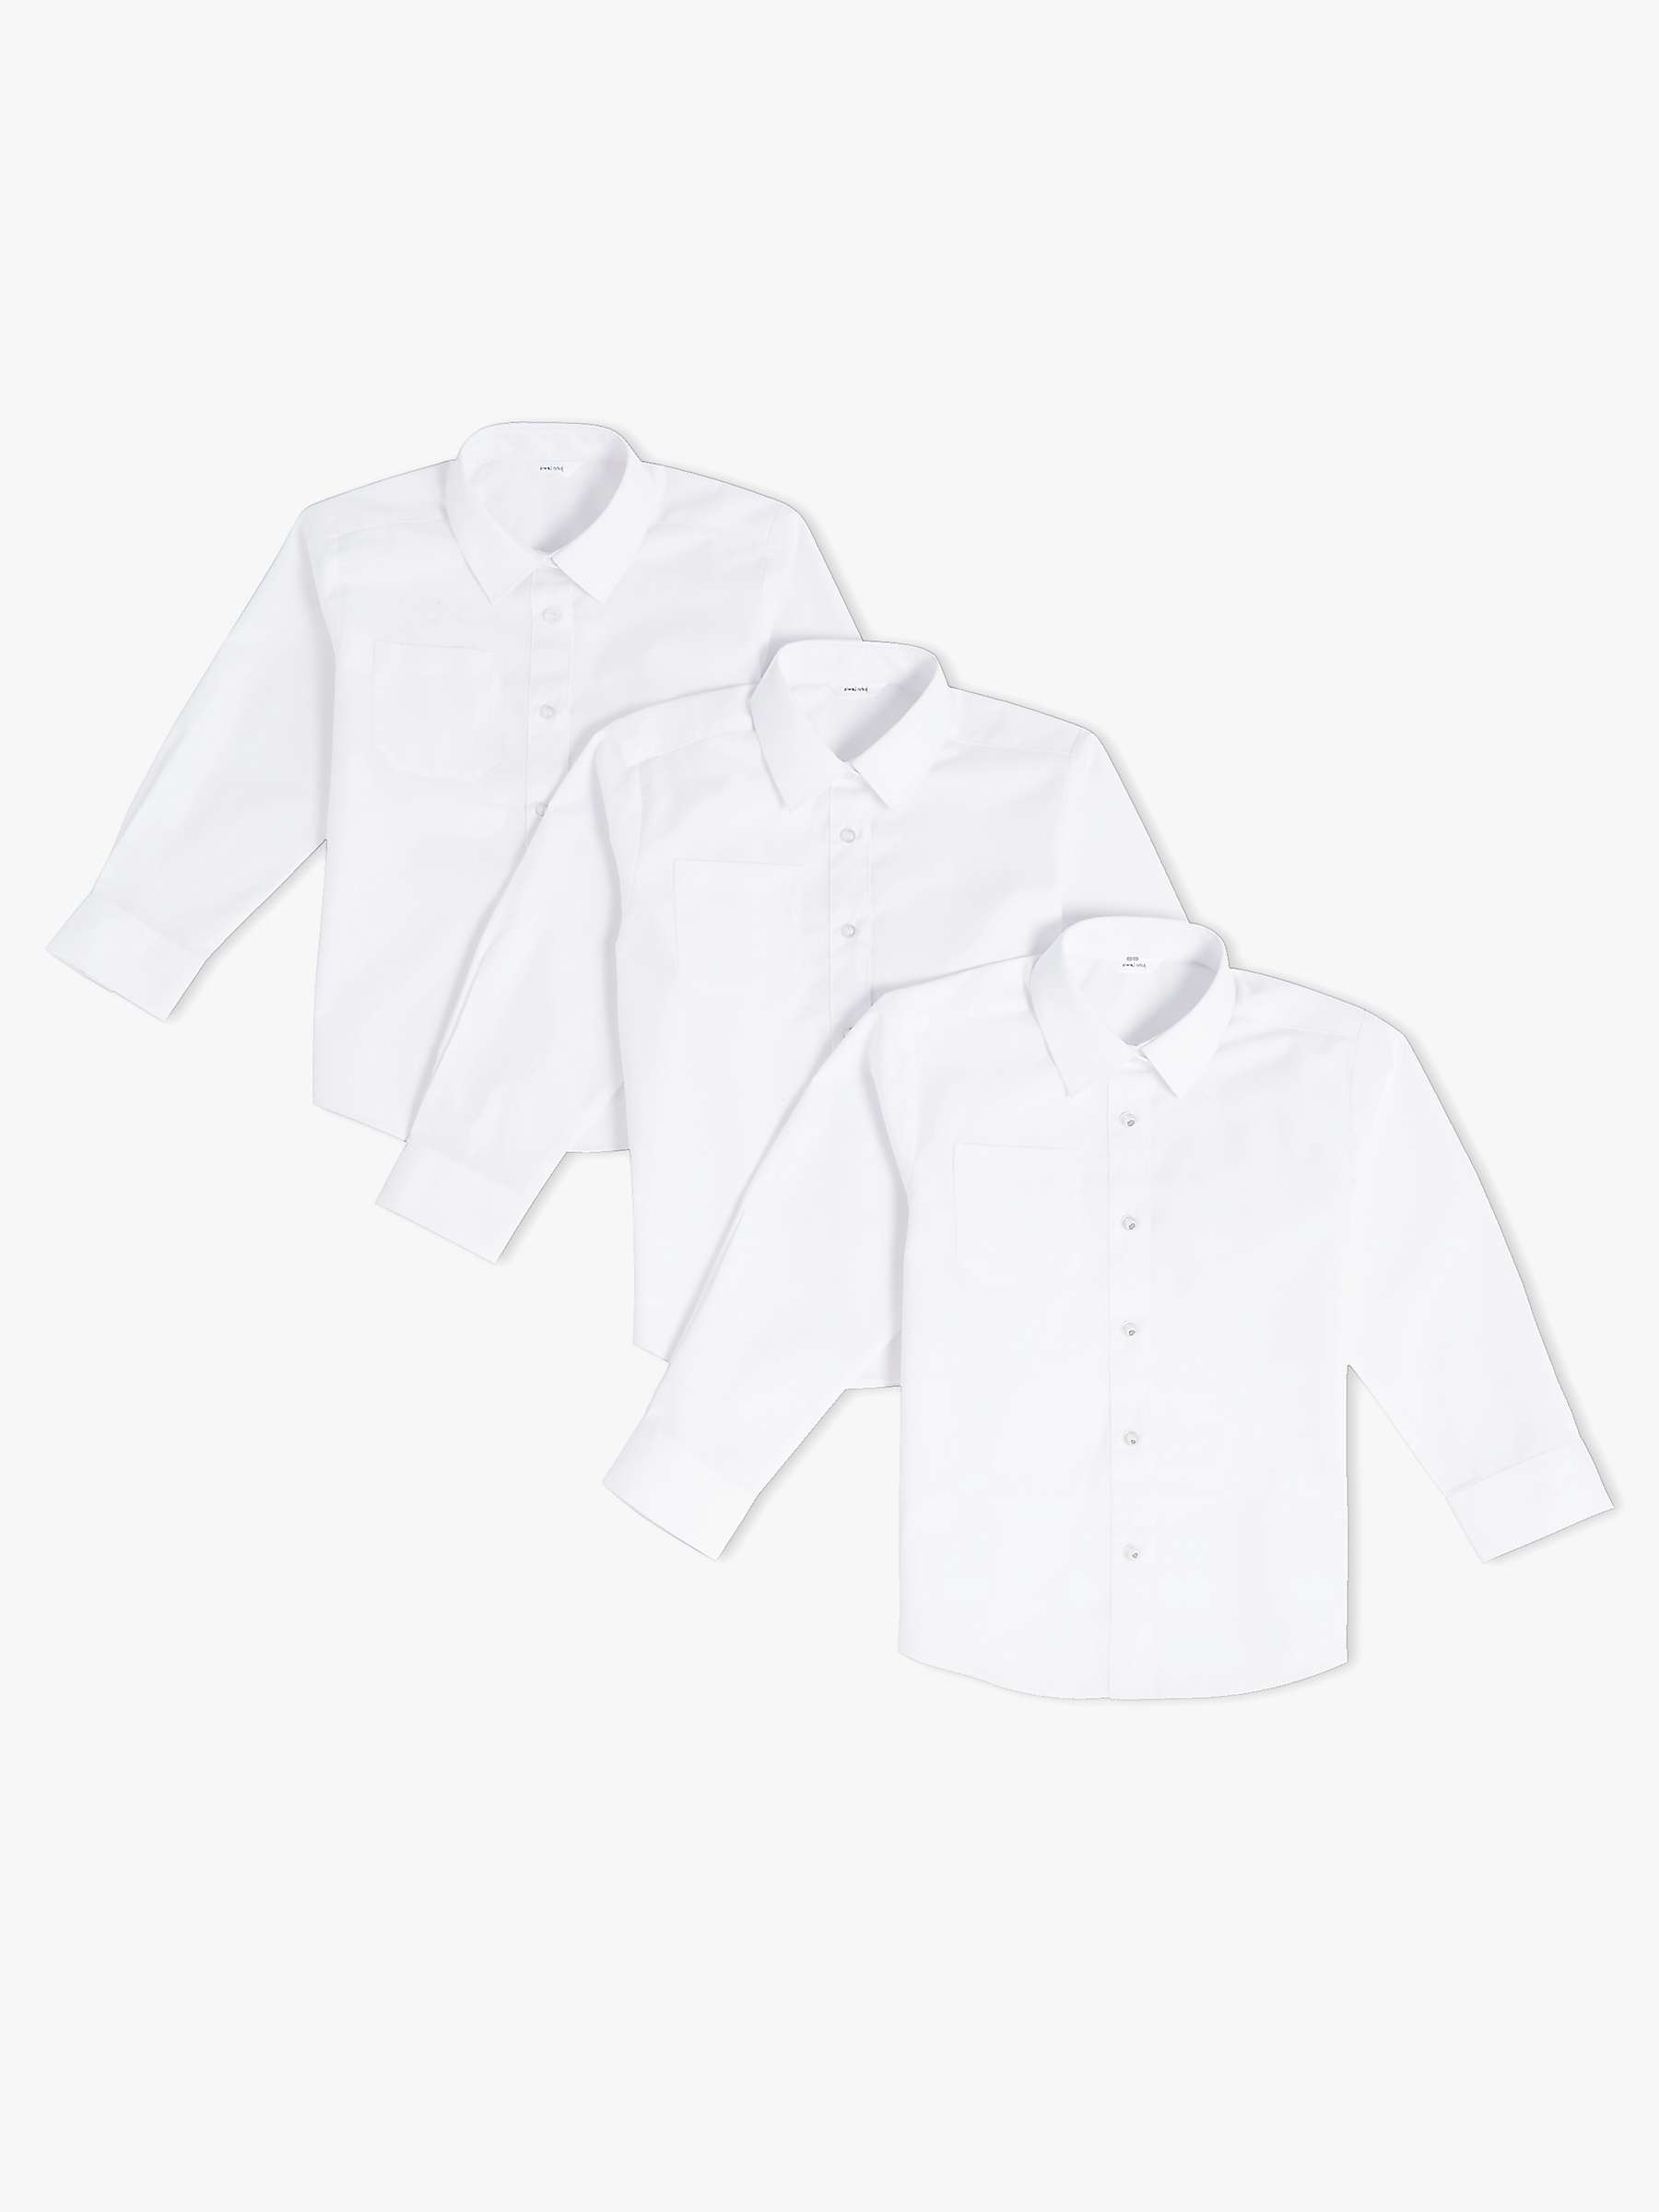 Buy John Lewis ANYDAY The Basics Long Sleeved Shirt, Pack of 3 Online at johnlewis.com